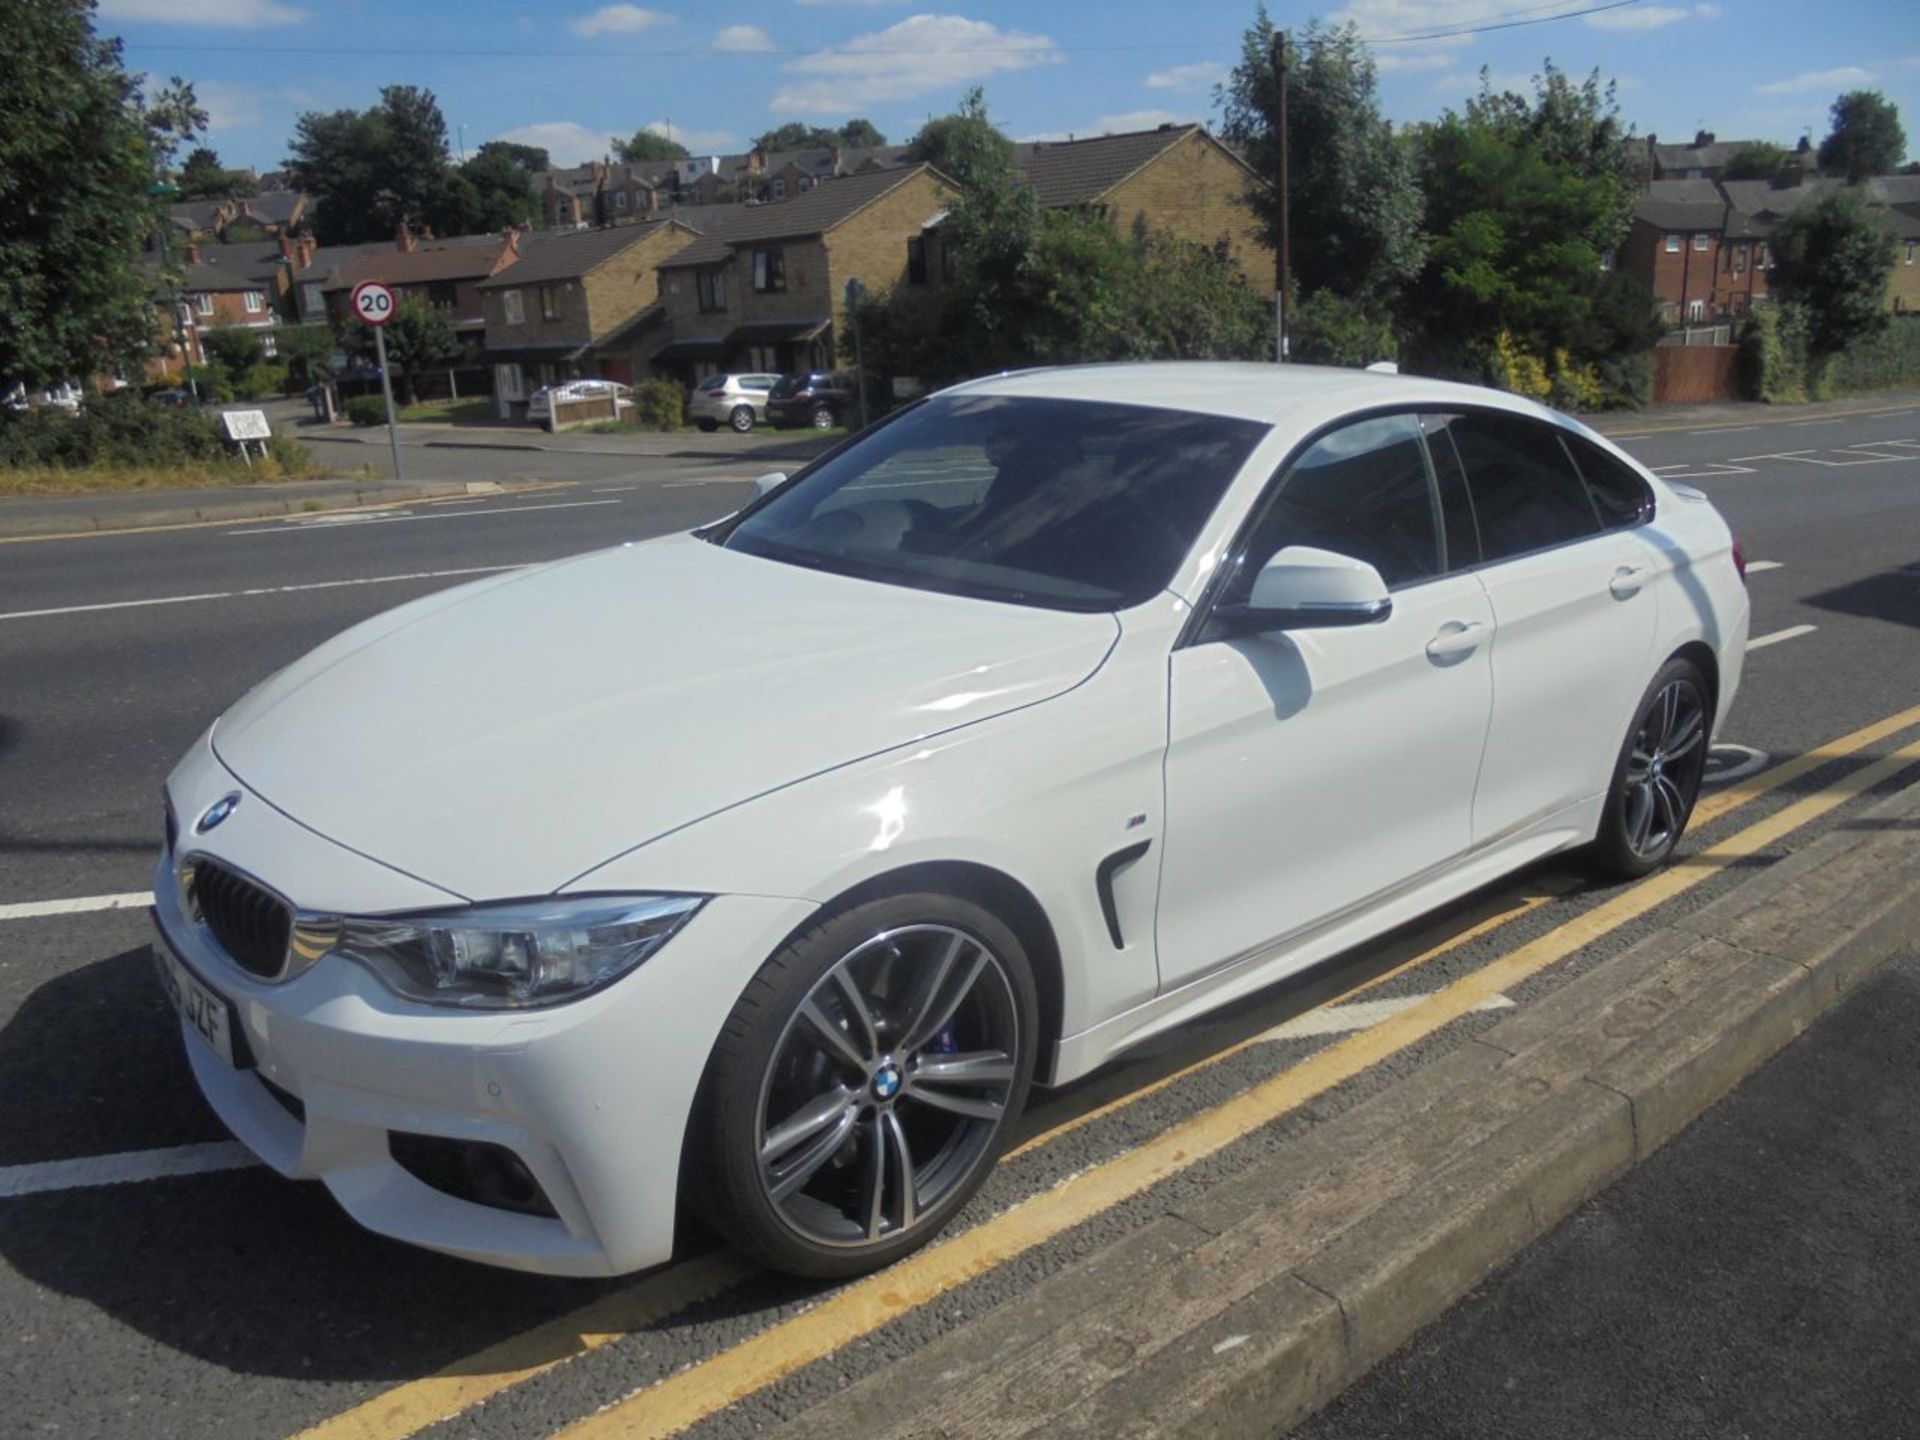 2015 (65 REG), BMW 4 SERIES GRAN COUPE 3.0 435I M SPORT GRAN COUPE AUTO 5DR COUPE, 1,200 MILES ONLY